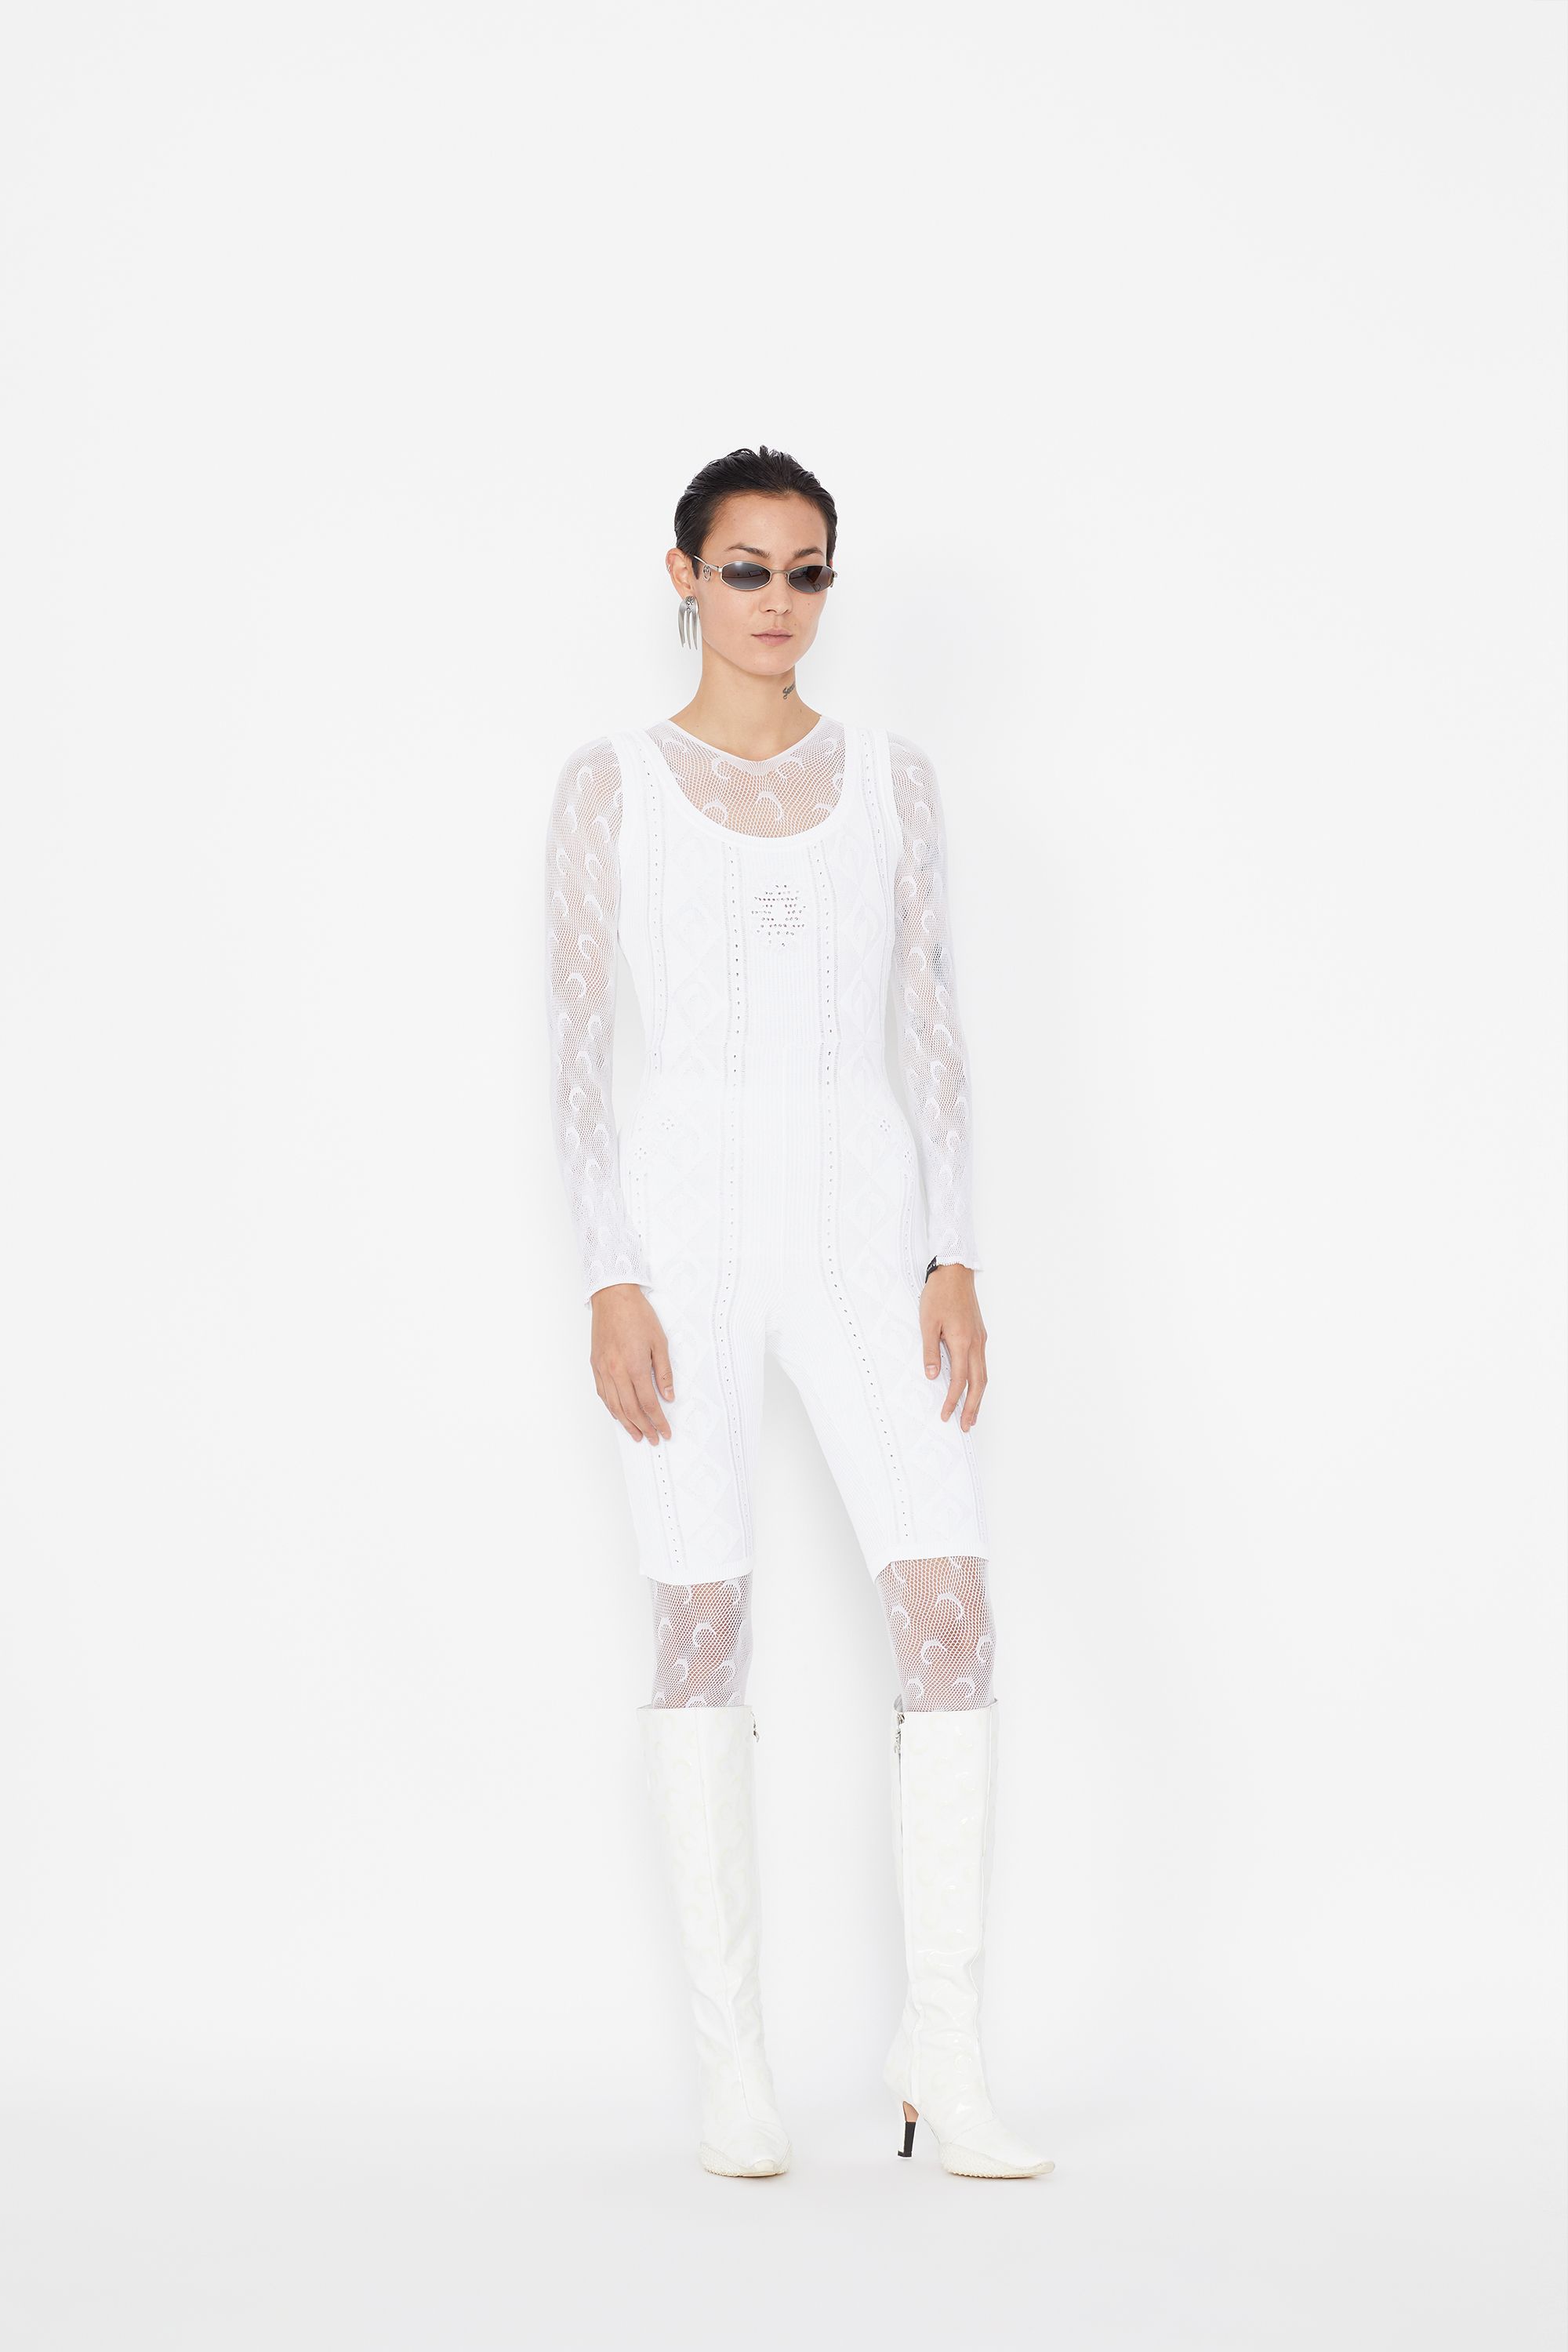 Lunar-Pointelle Knit Cycling Catsuit • Marine Serre